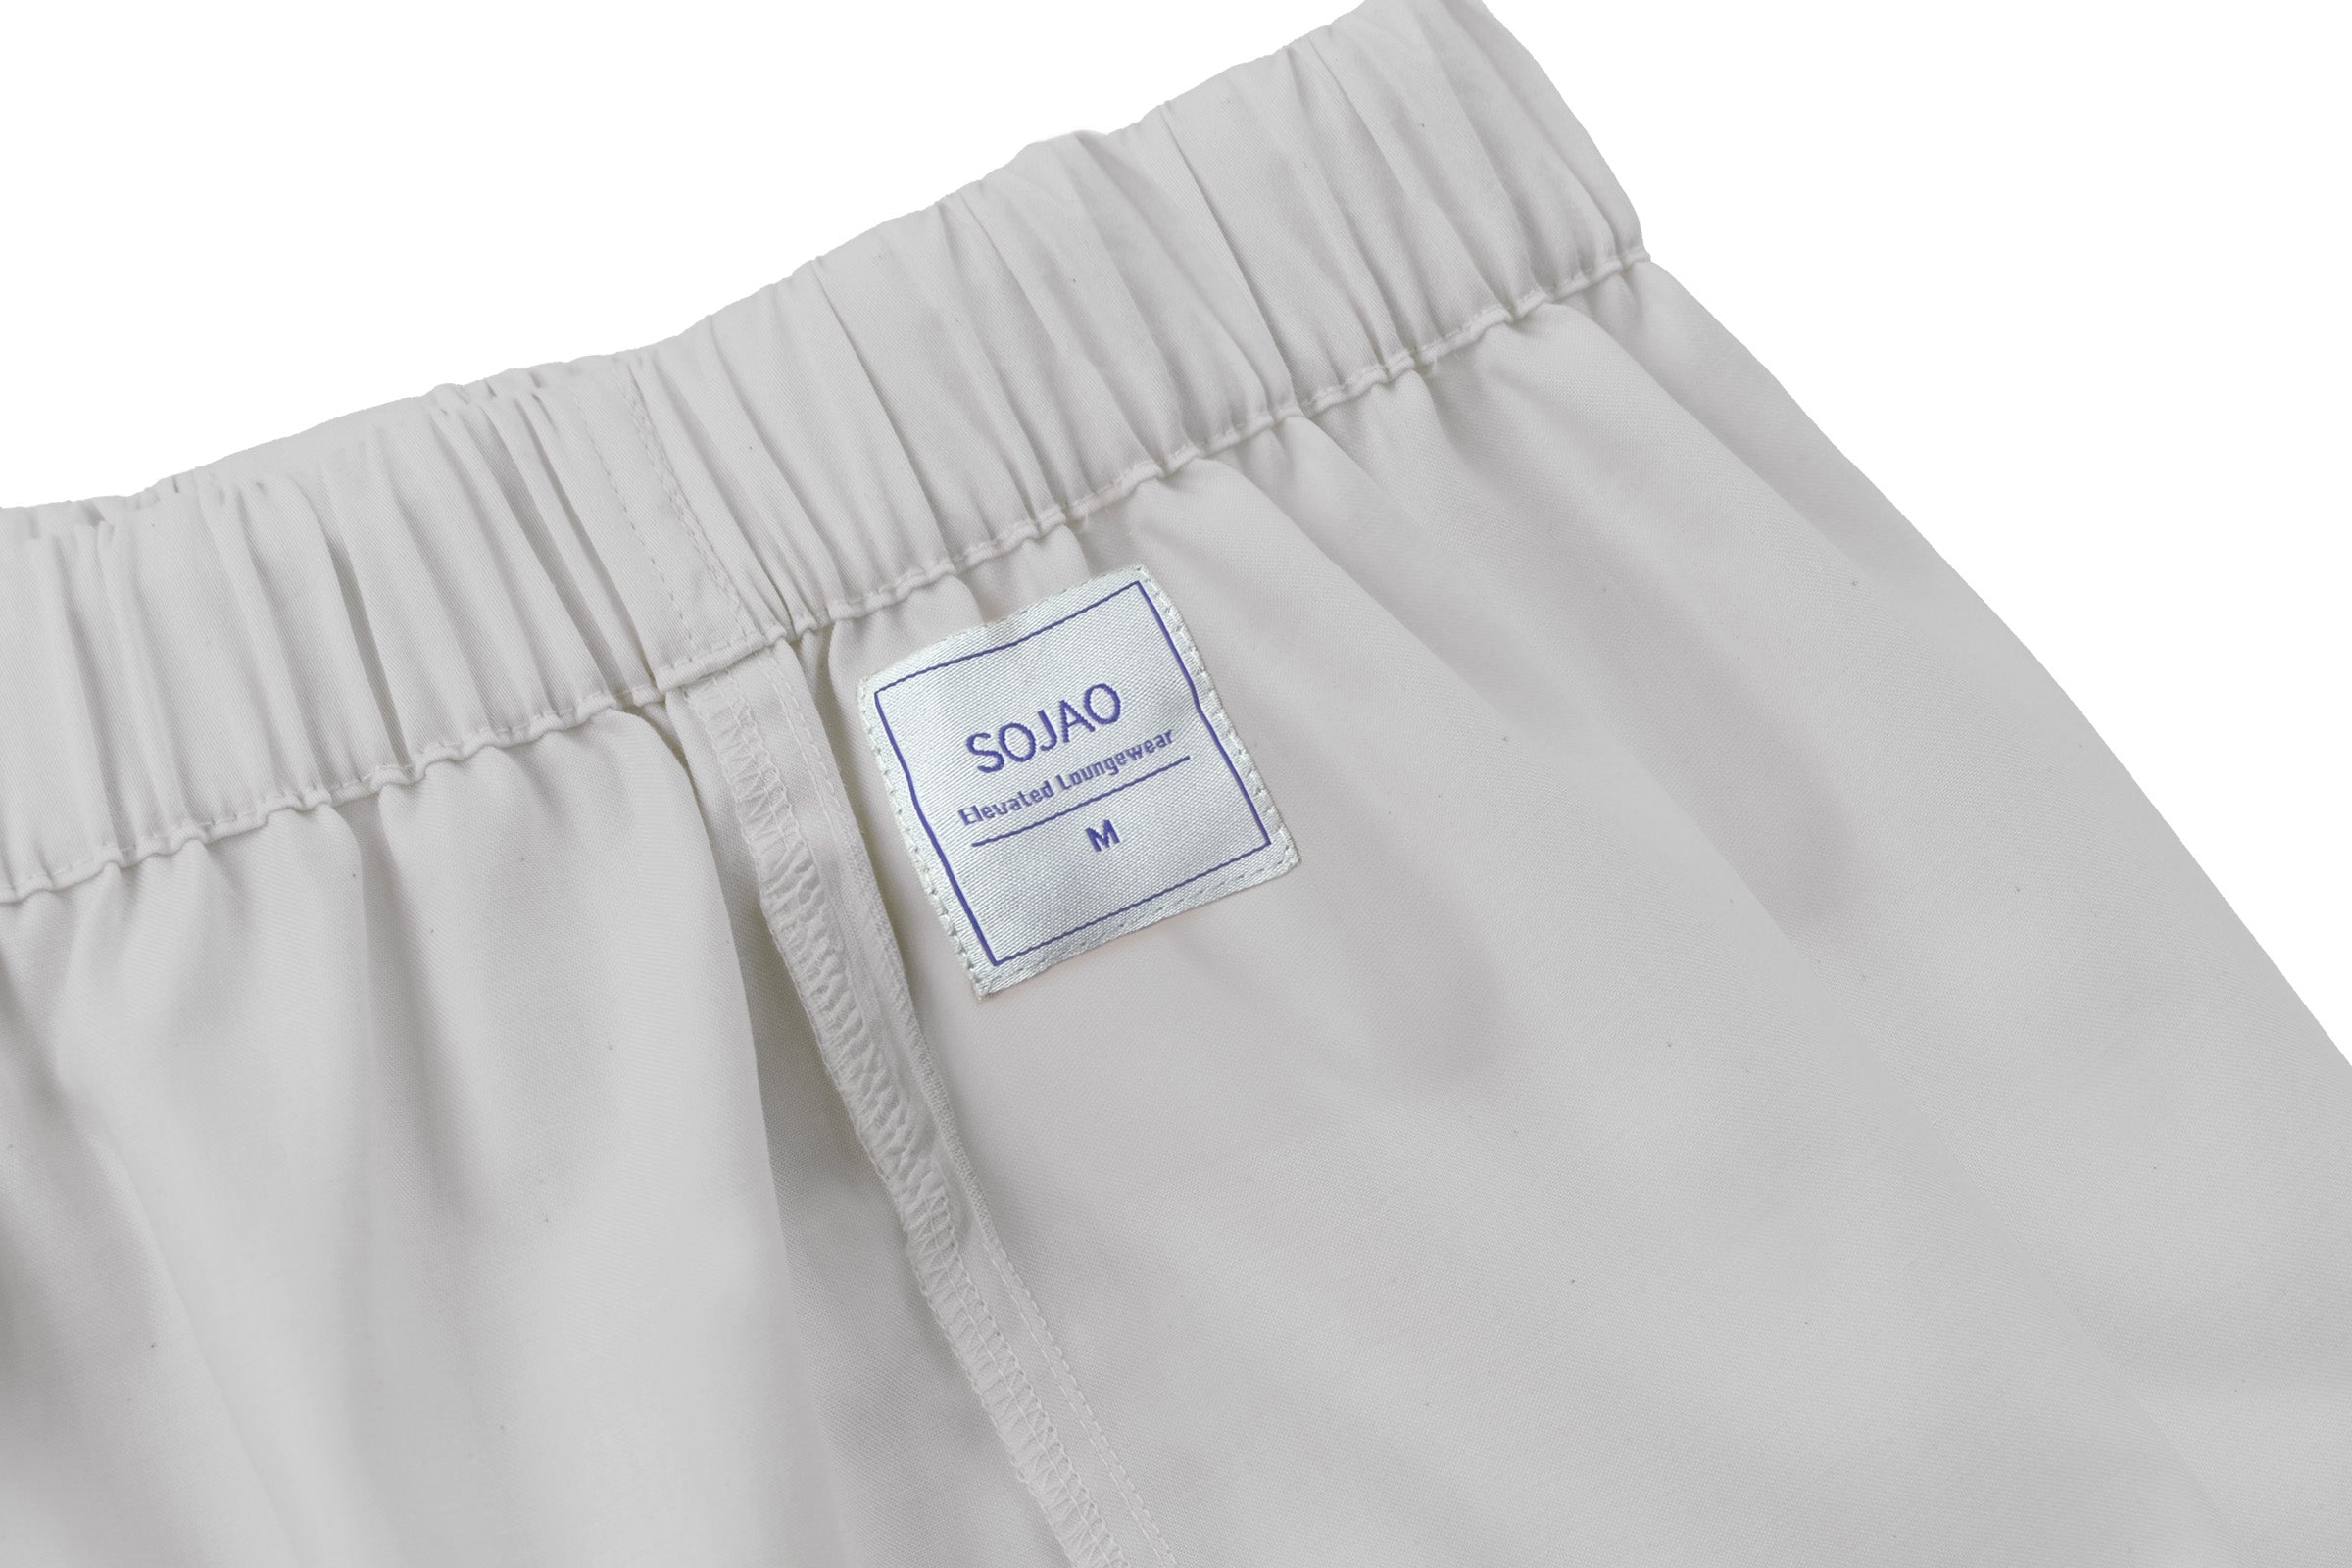 organic-cotton-mens-loungewear-shorts-last-call-stitched-label-by-sojao.jpg